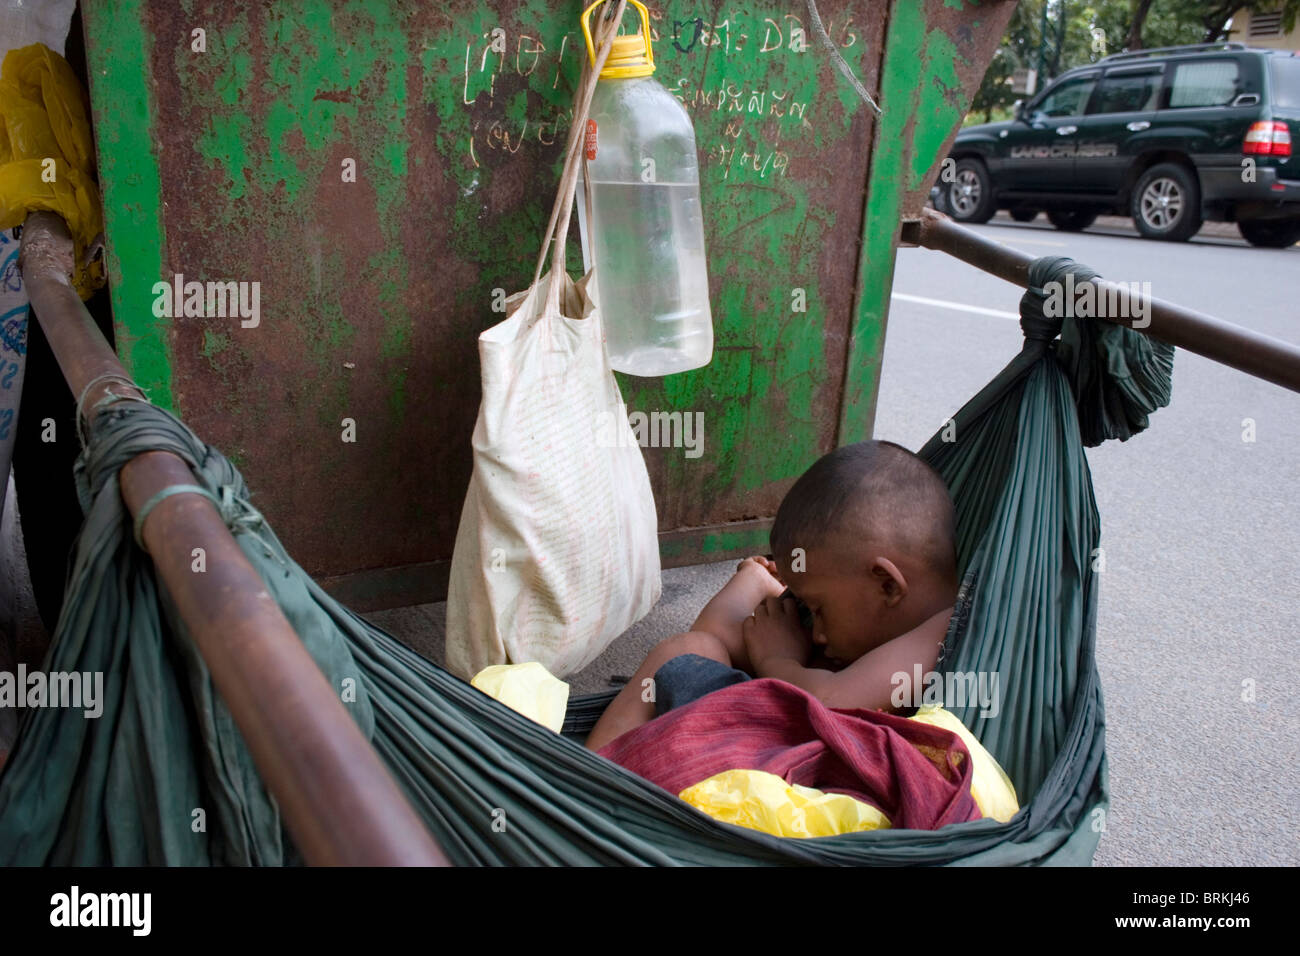 A young boy is sleeping in a hammock tied to a Cintri garbage collection cart on Norodom Boulevard in Phnom Penh, Cambodia. Stock Photo